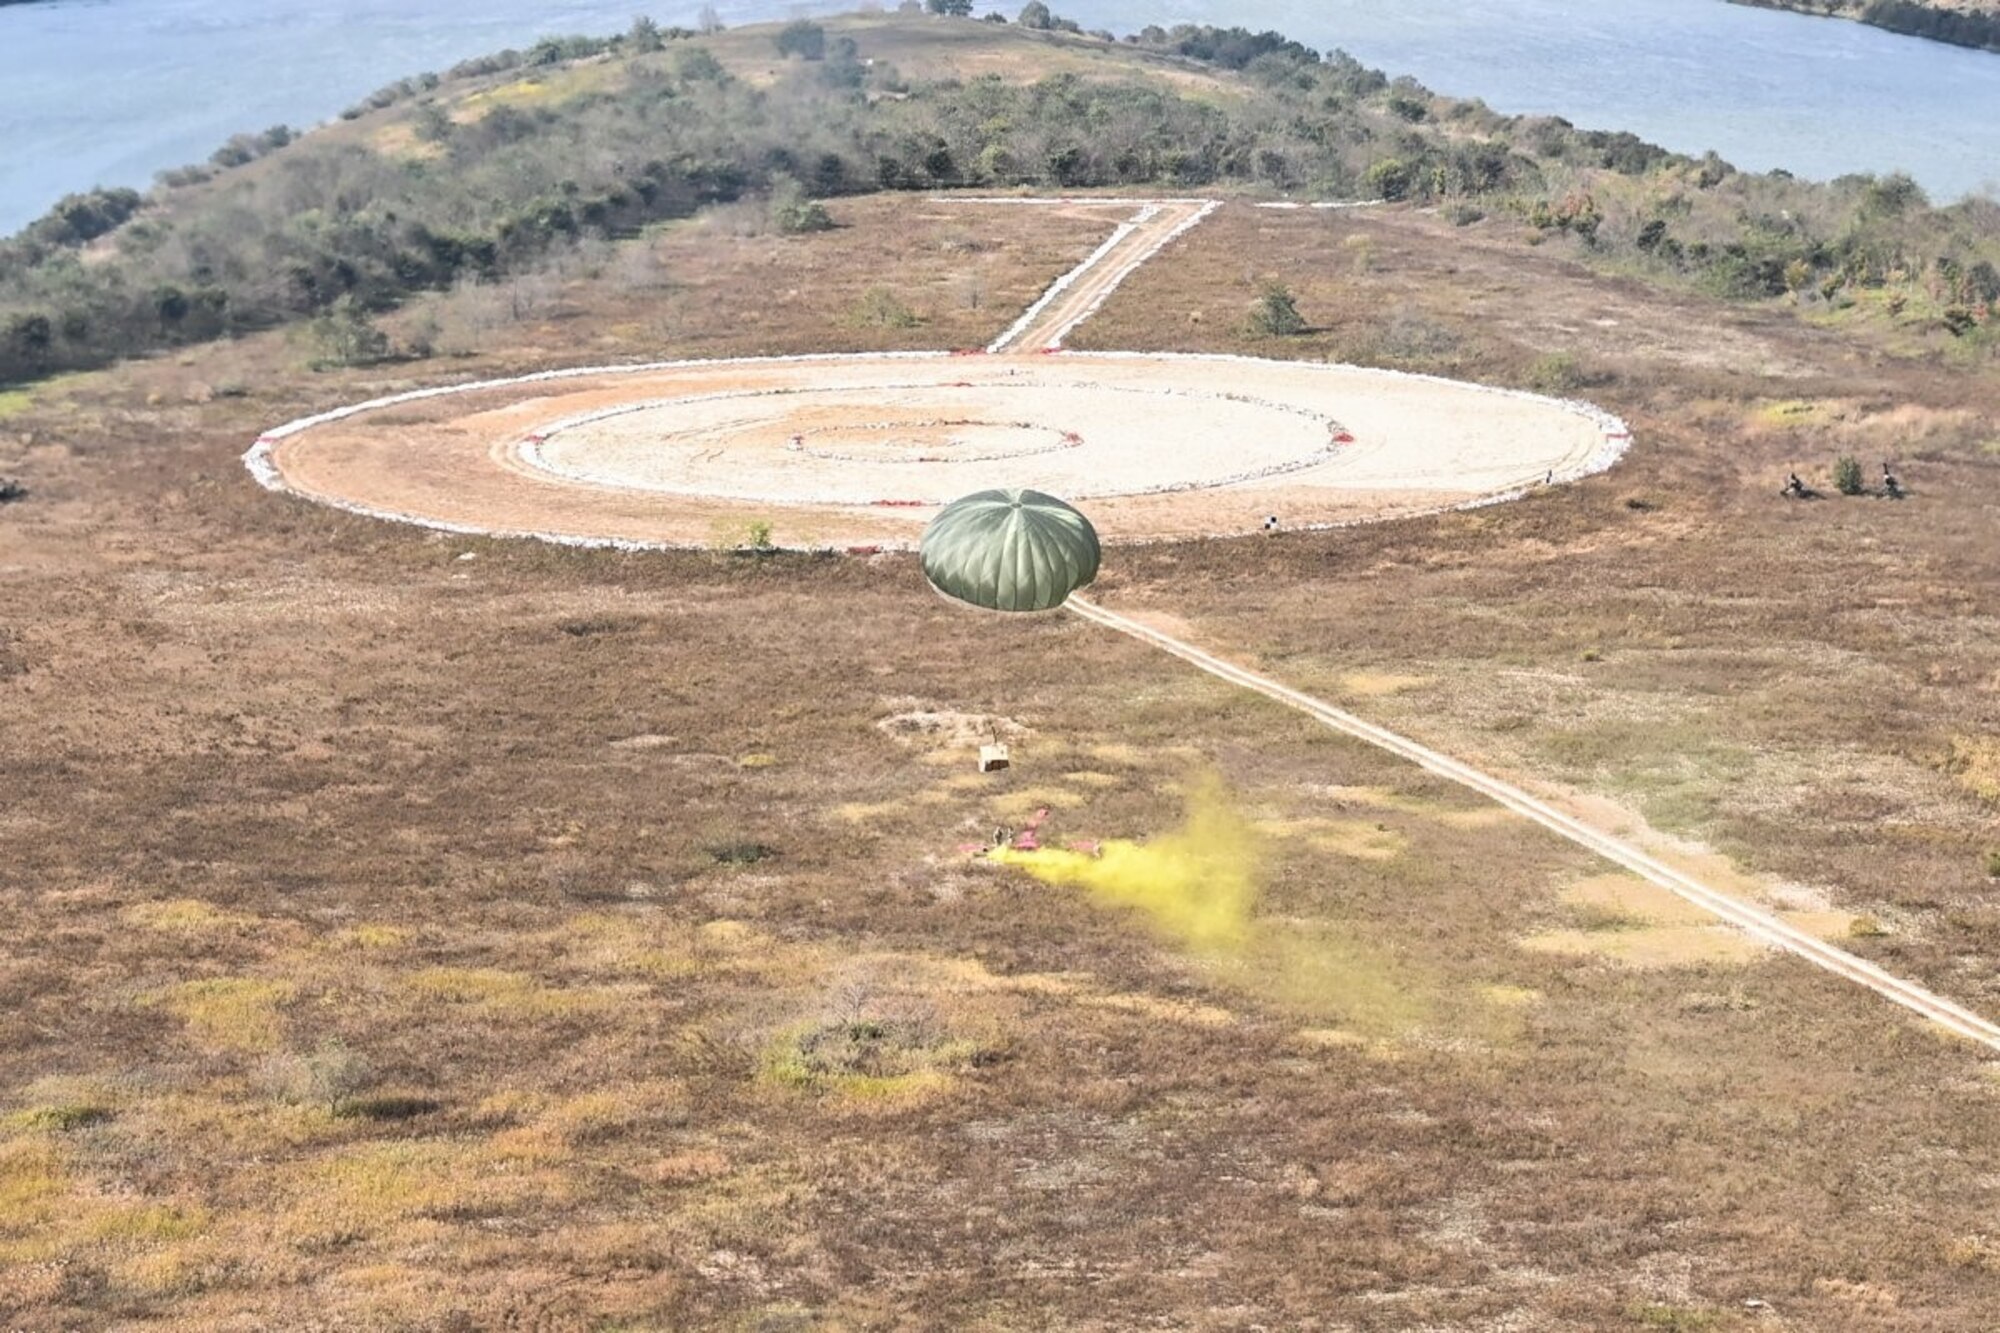 A pallet attached to a parachute makes its way to a drop zone during Operation Christmas Drop training in the Republic of Korea October 22, 2021. This is the first year the Republic of Korea and U.S. have teamed up for the longest running Department of Defense humanitarian and disaster relief training mission which reaches more than 20,000 people annually. (Courtesy photo from Republic of Korea Air Force)